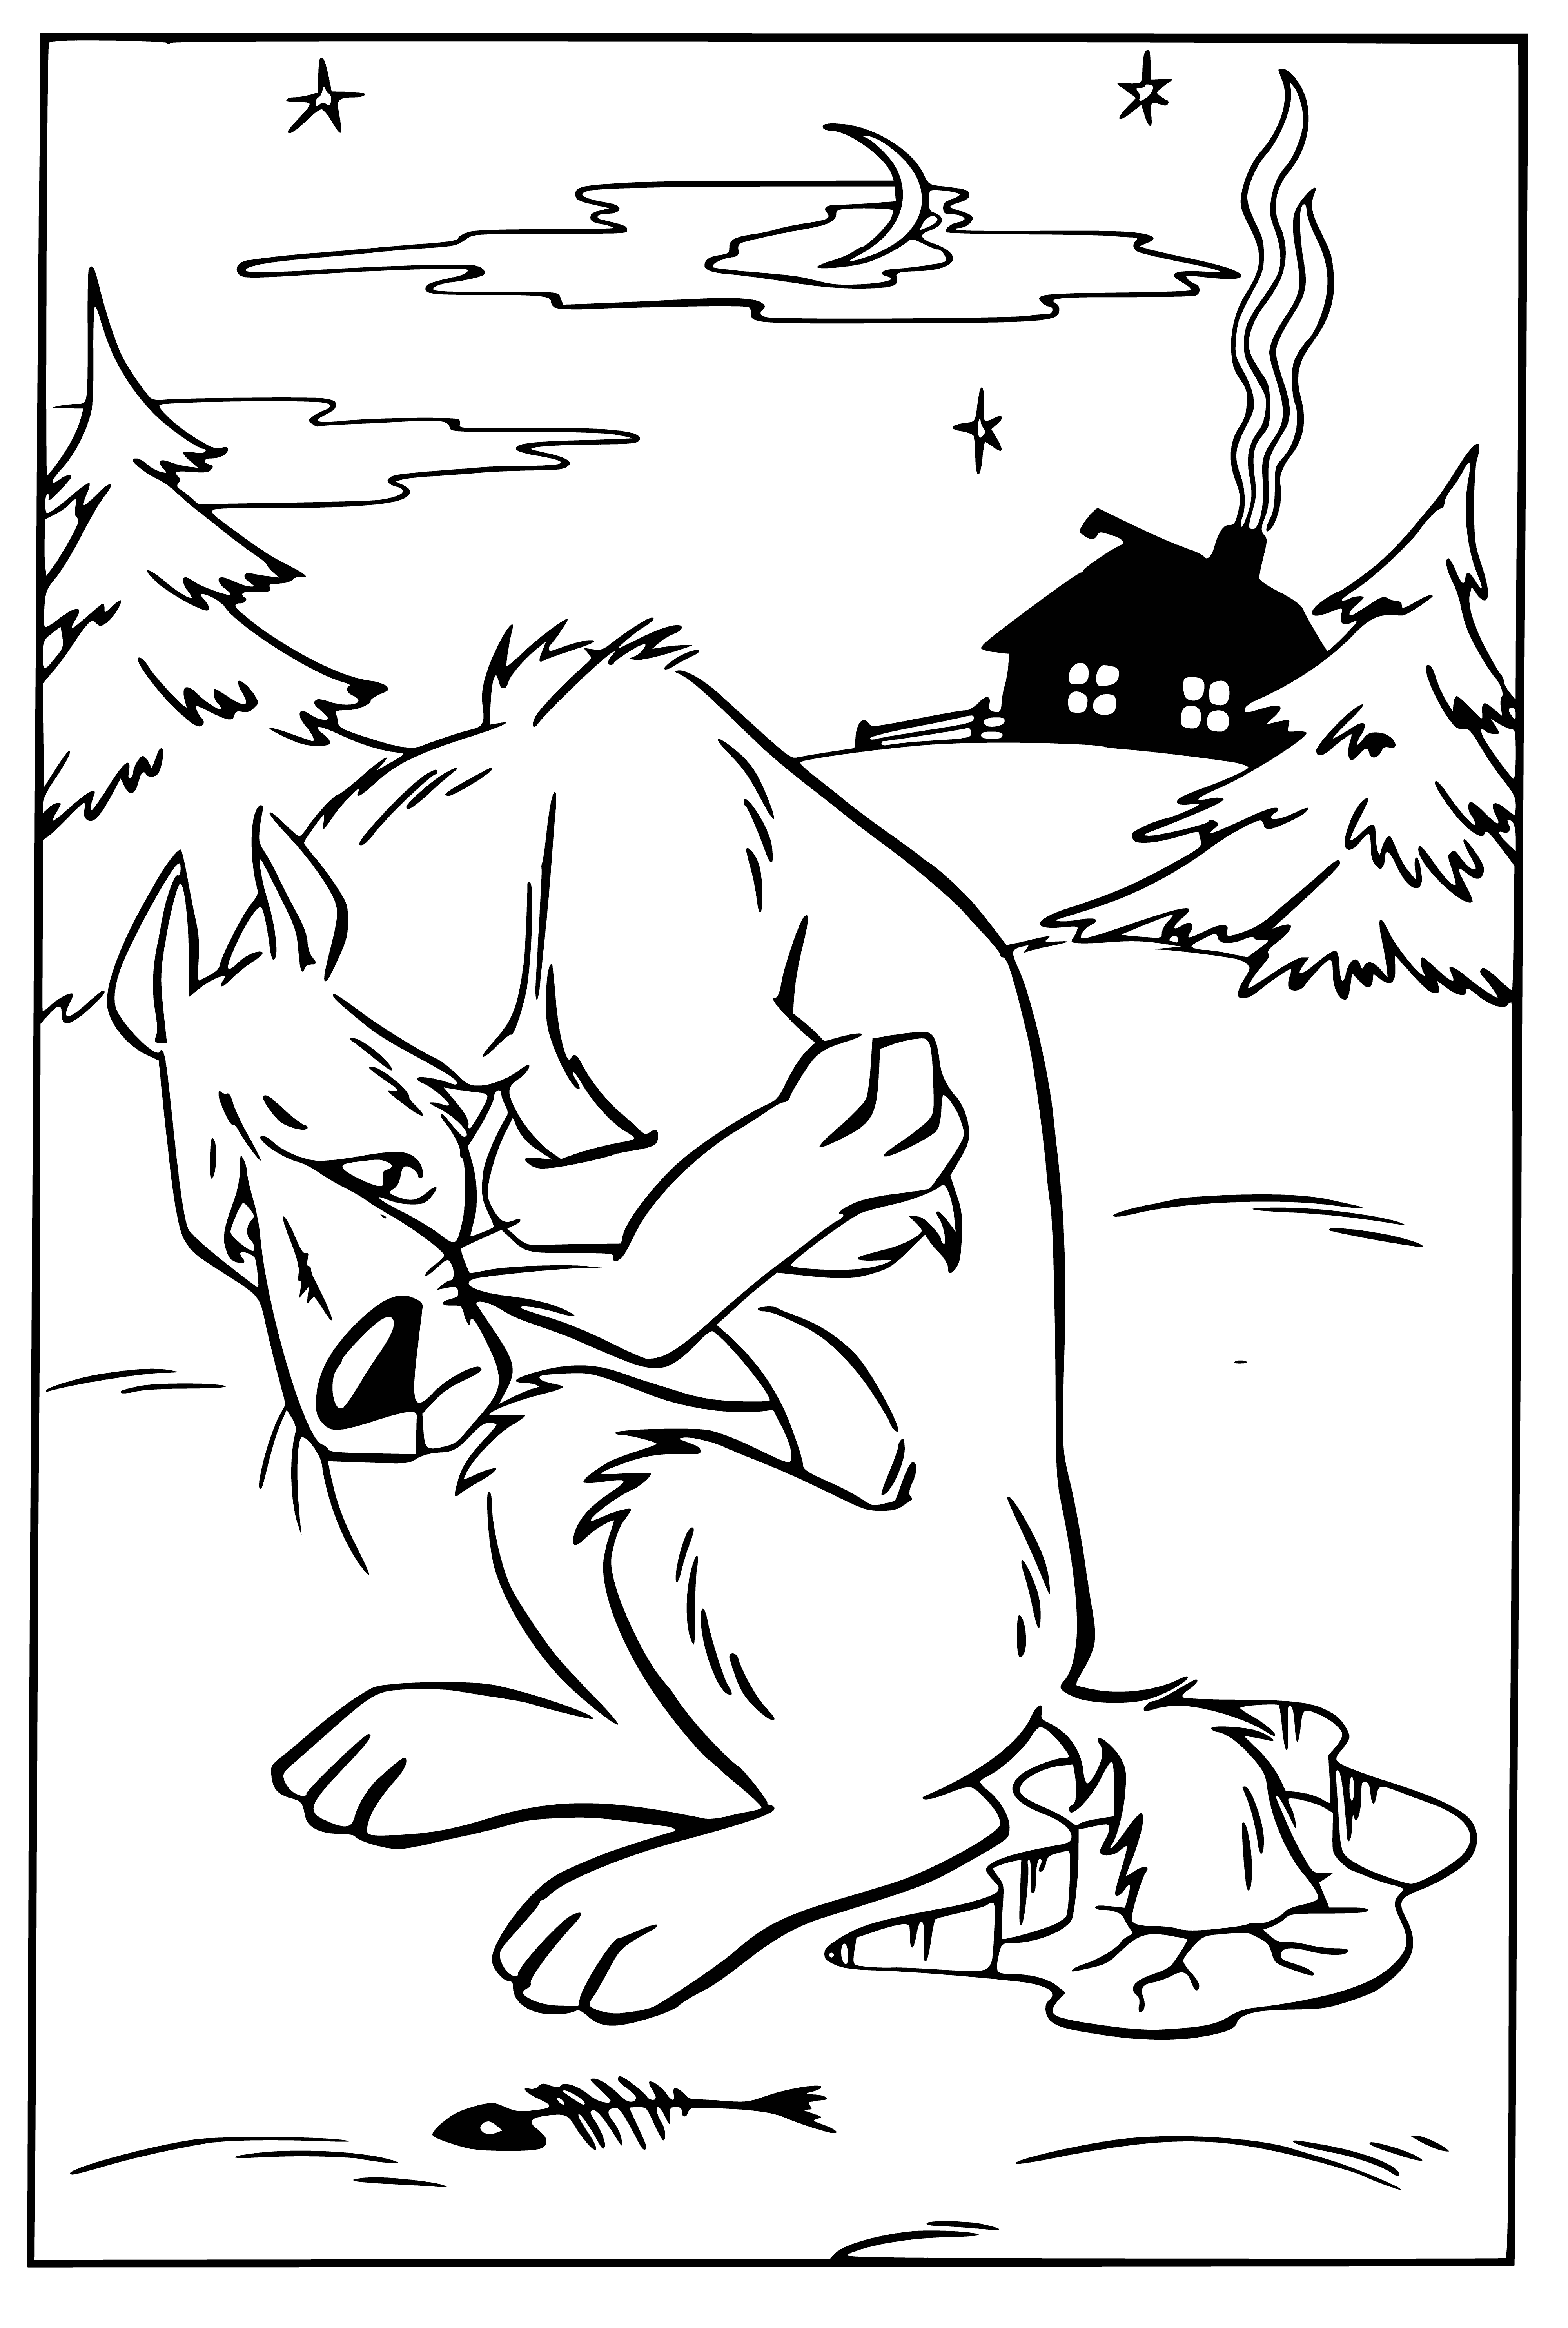 coloring page: A large hill with village and smoke-filled chimneys, with a wolf waiting in the foreground.